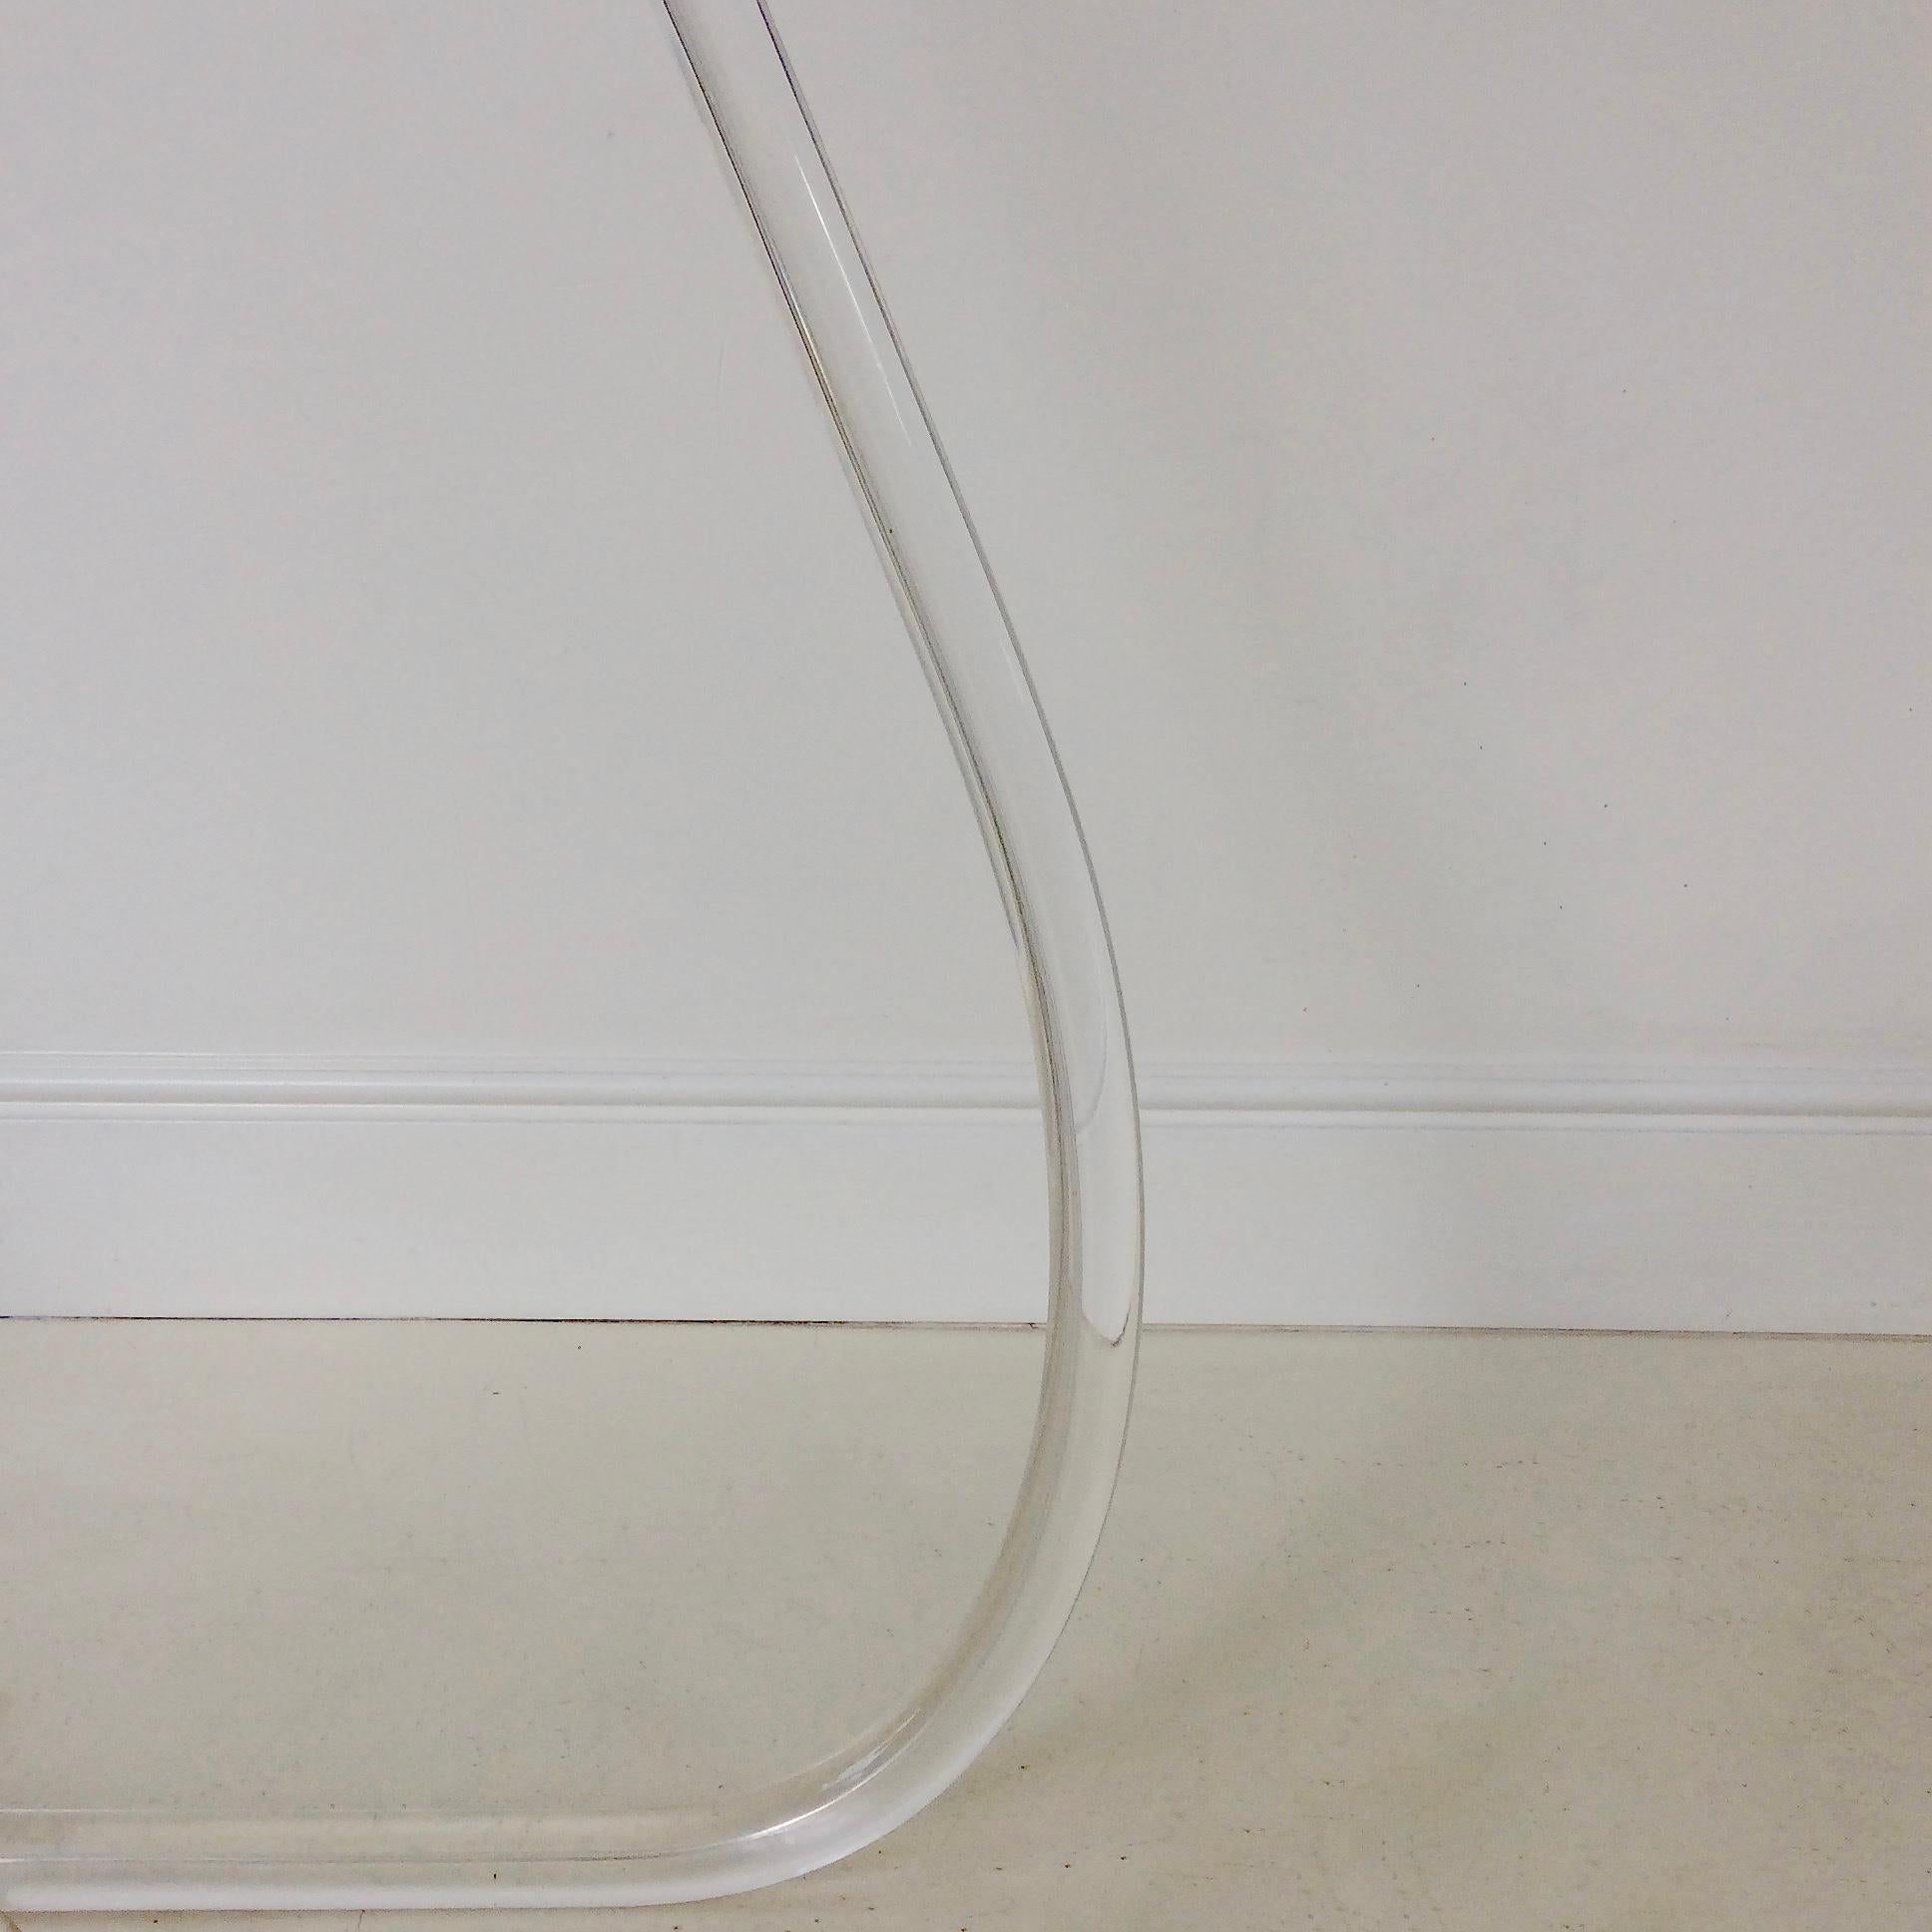 Chrome Peter Hamburger Lucite Floor Lamp for Knoll, circa 1970 For Sale